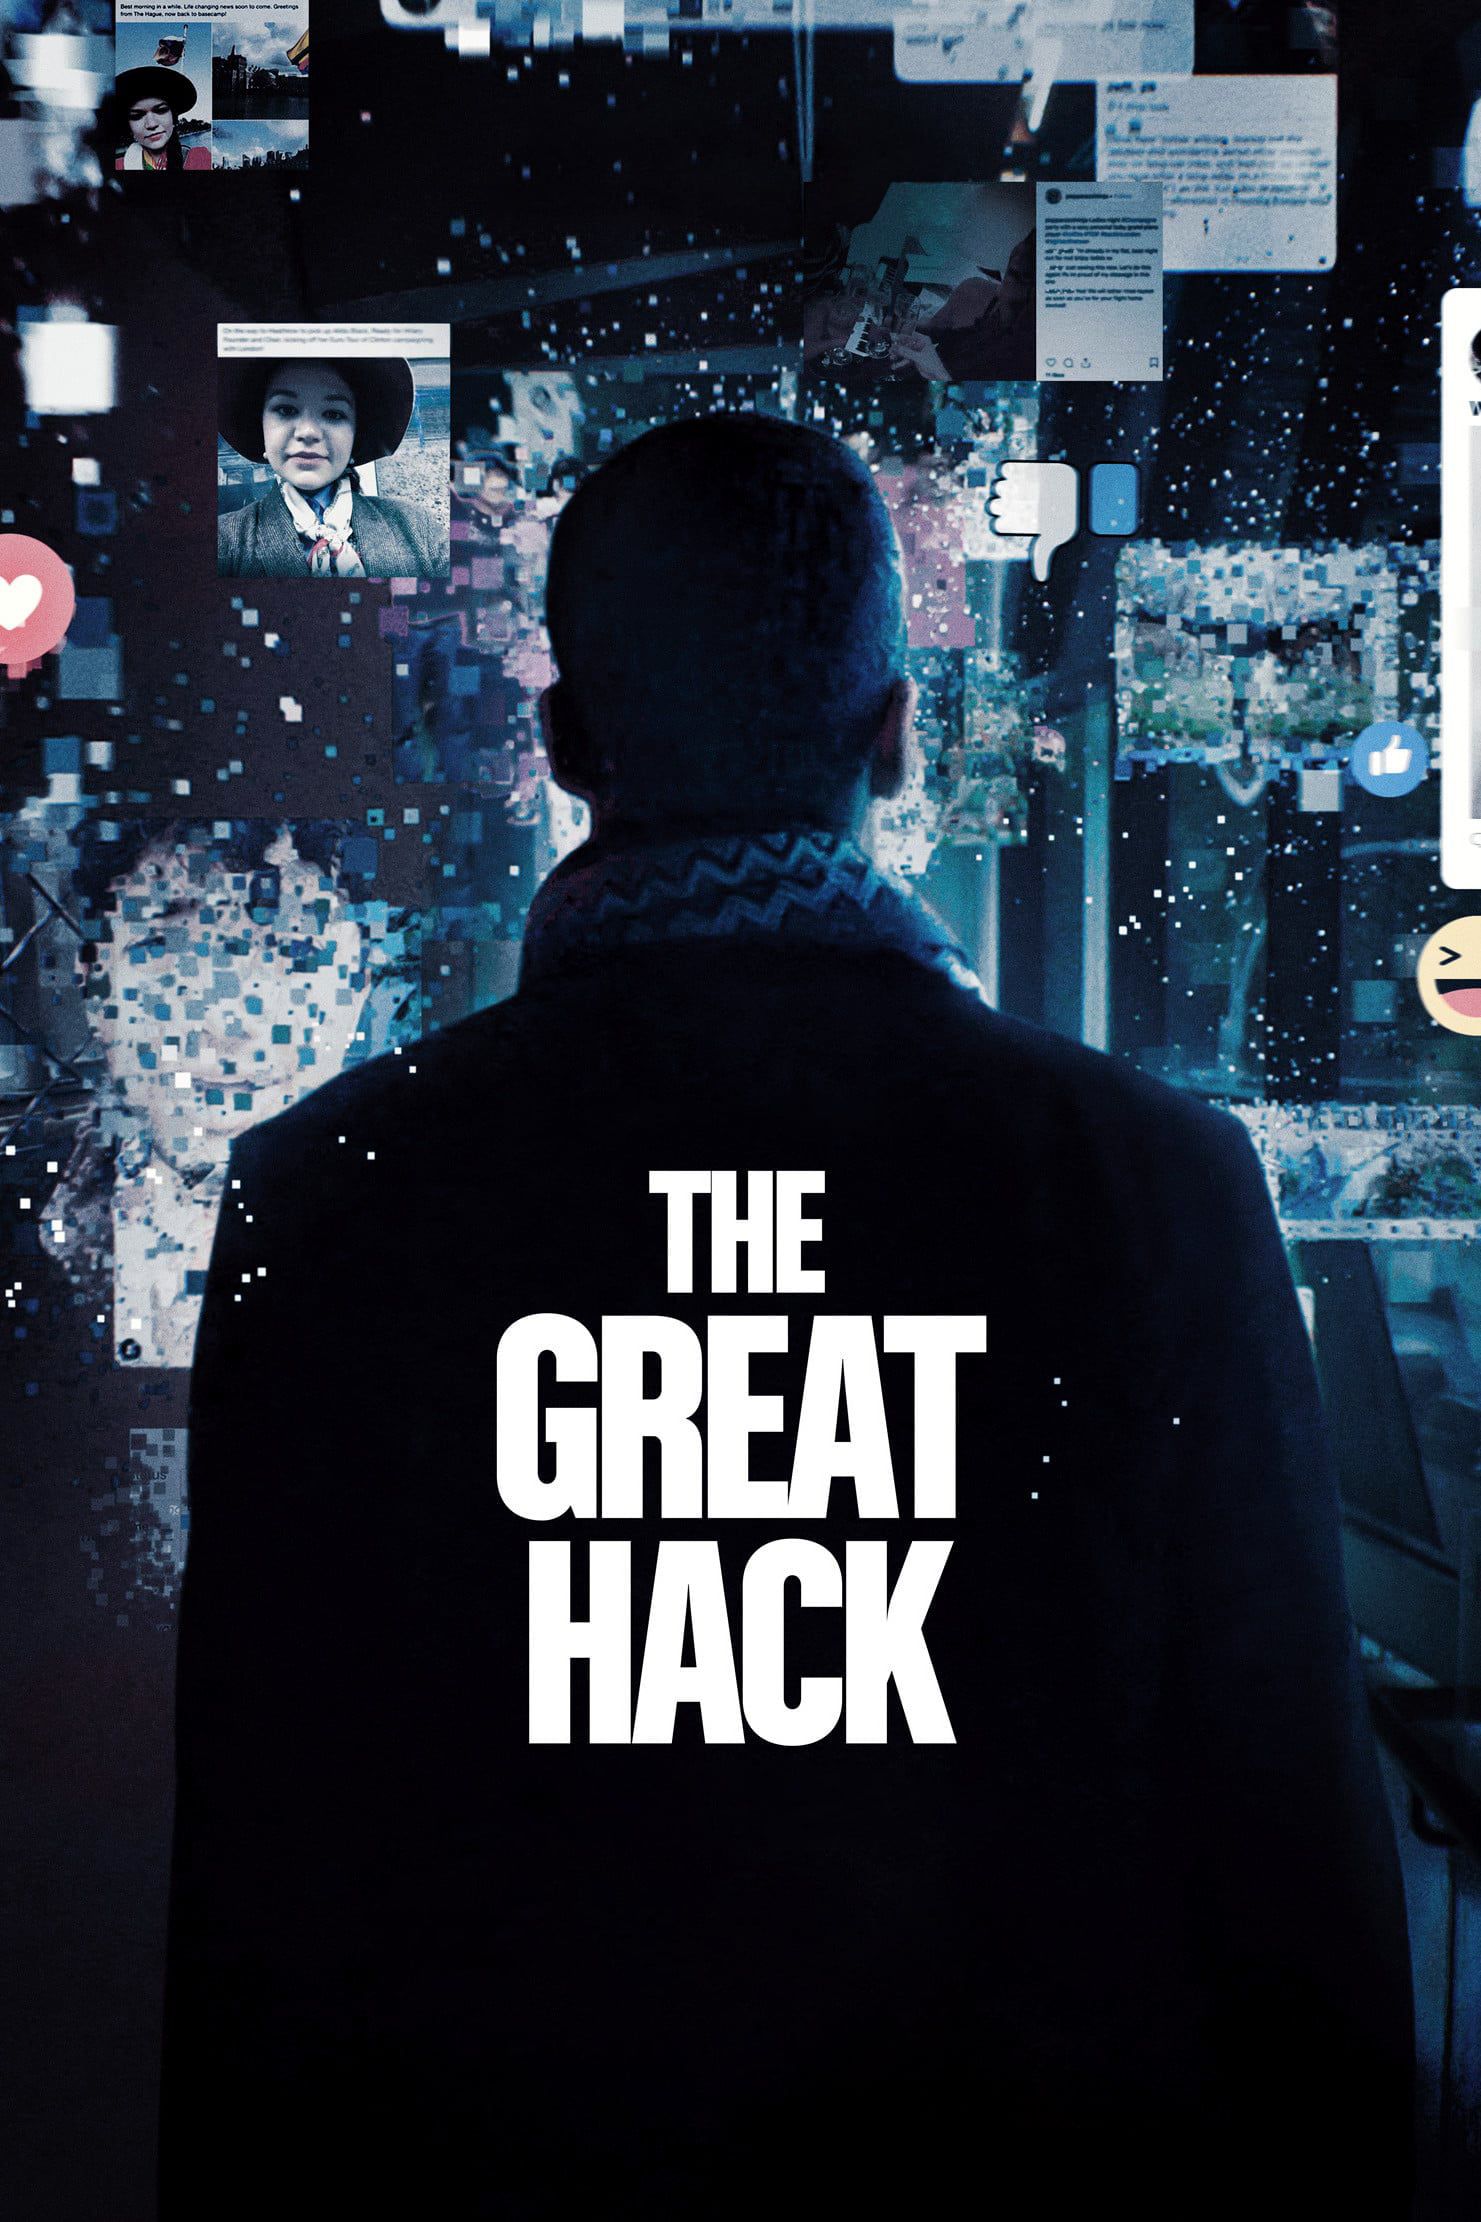 The Great Hack - Documentaire (2019) streaming VF gratuit complet